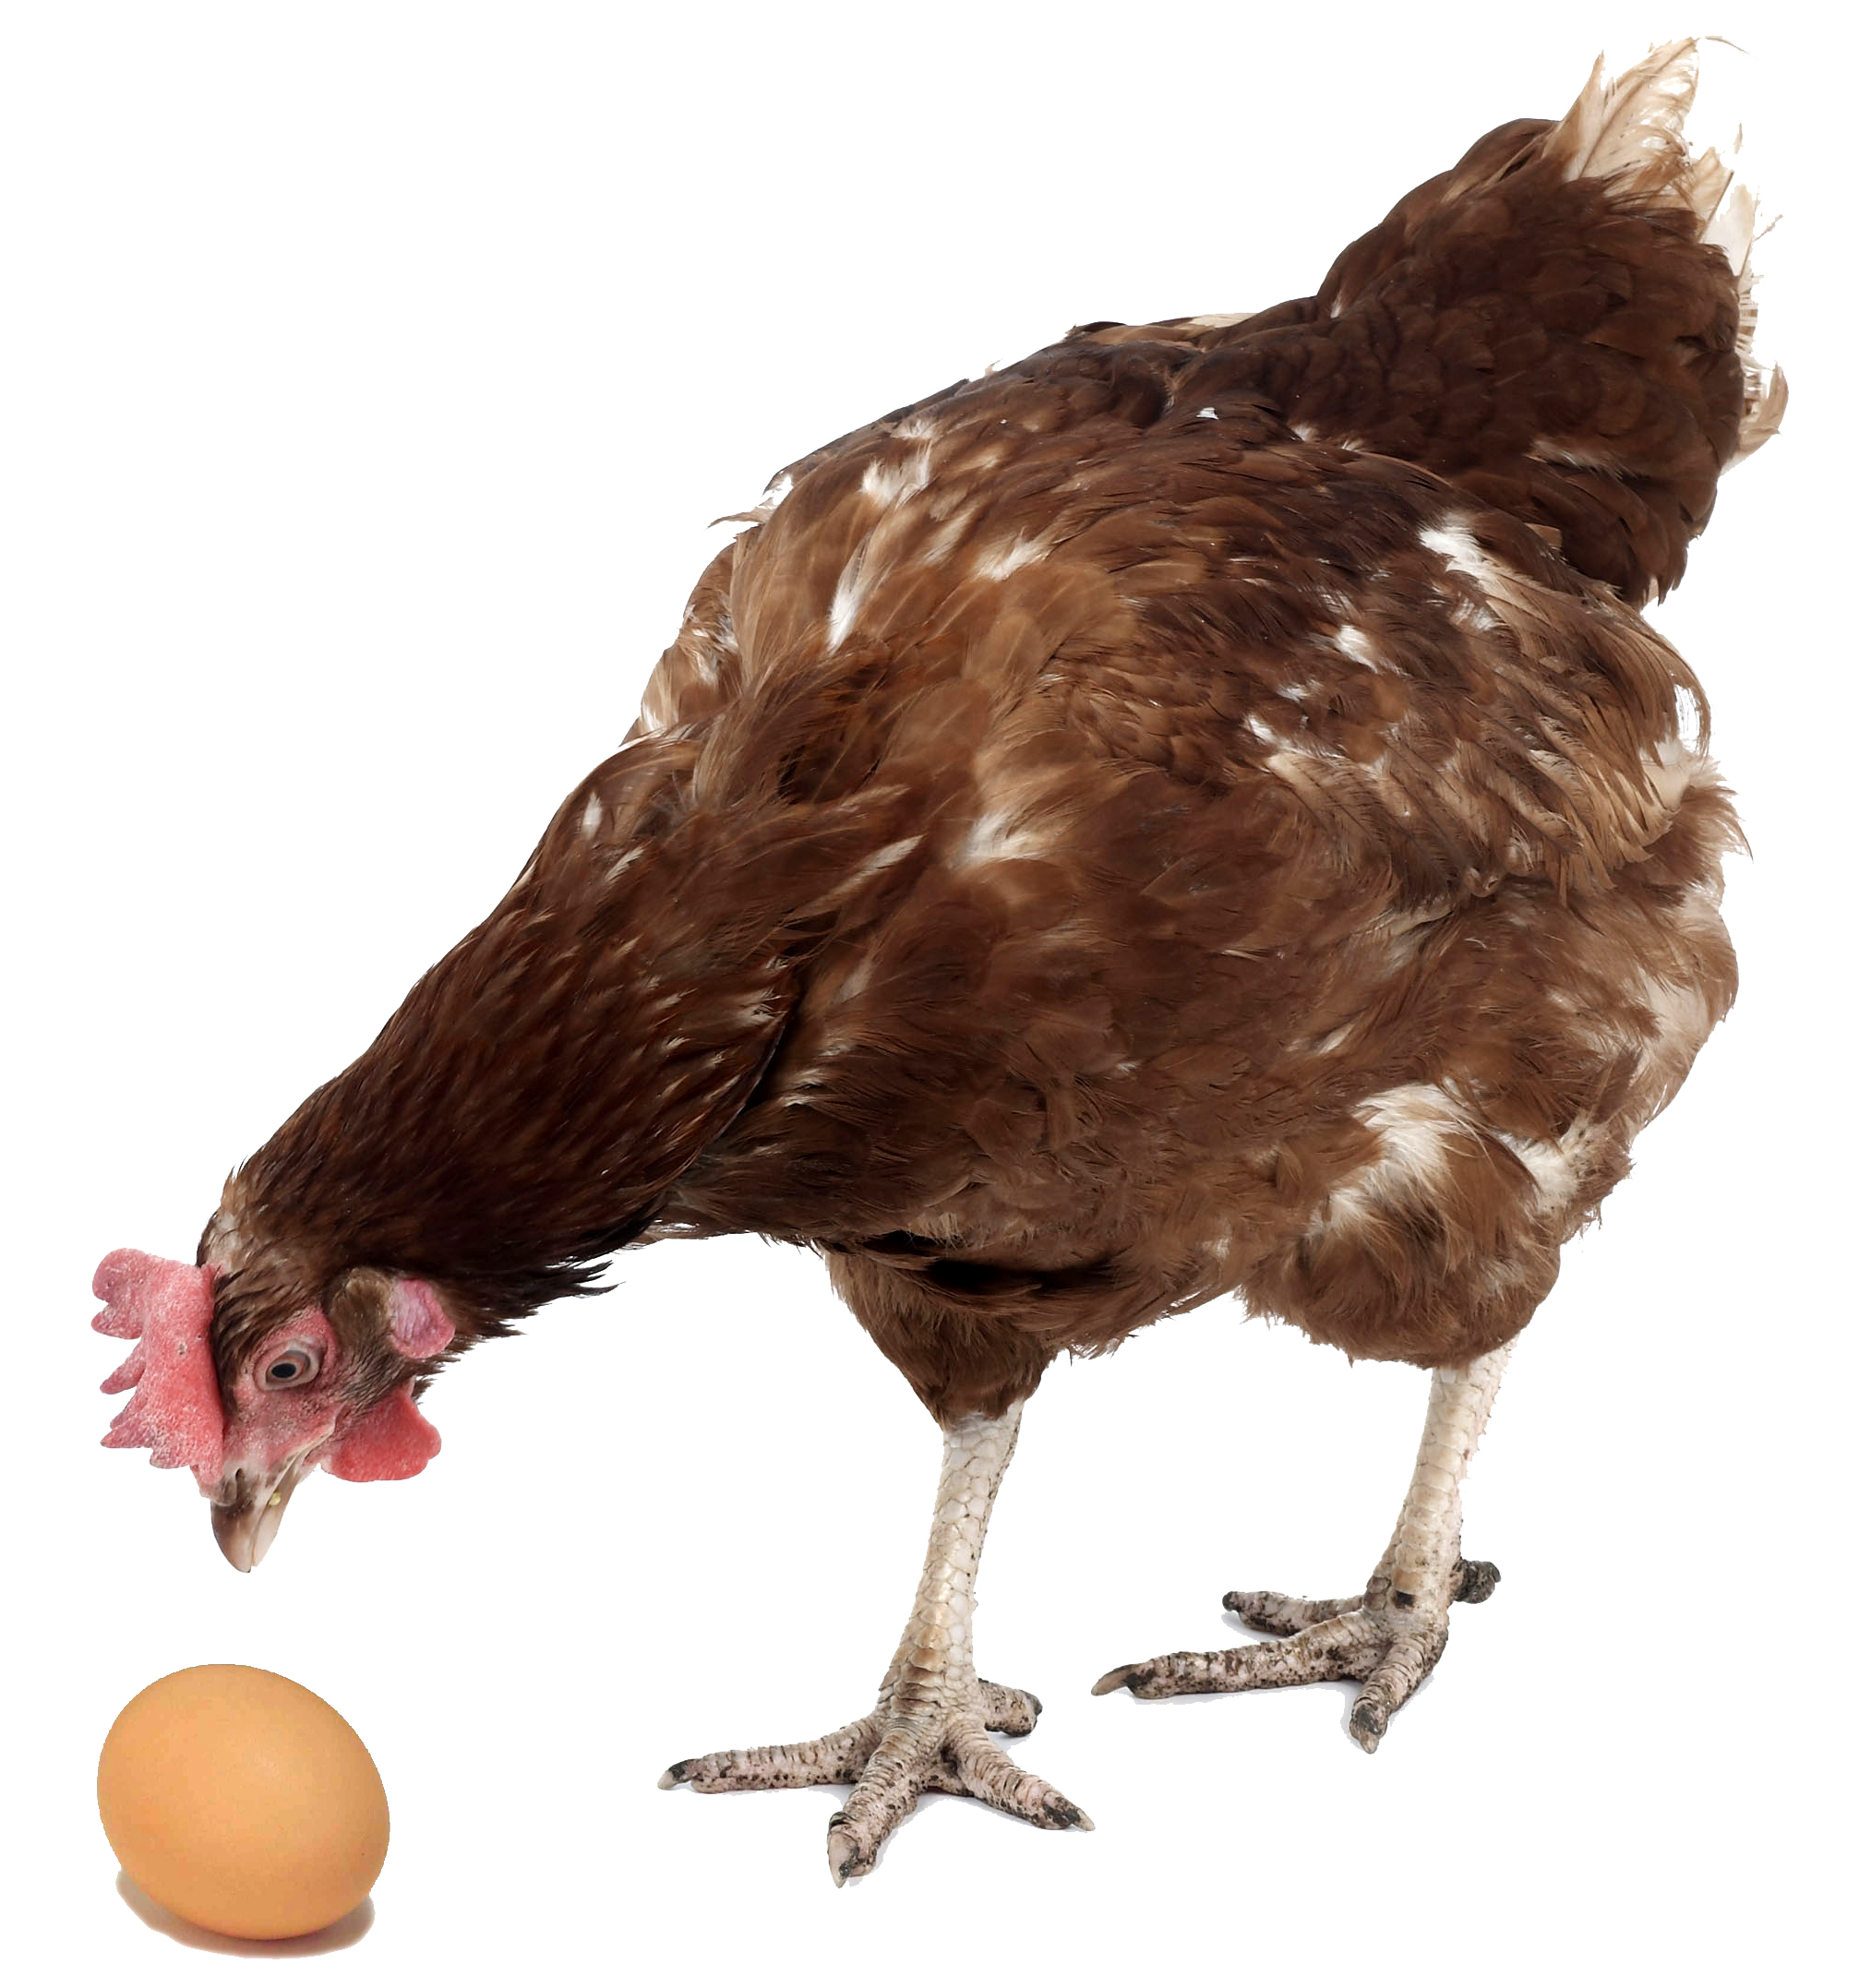 How does my hen produce an egg every day? Find out here!